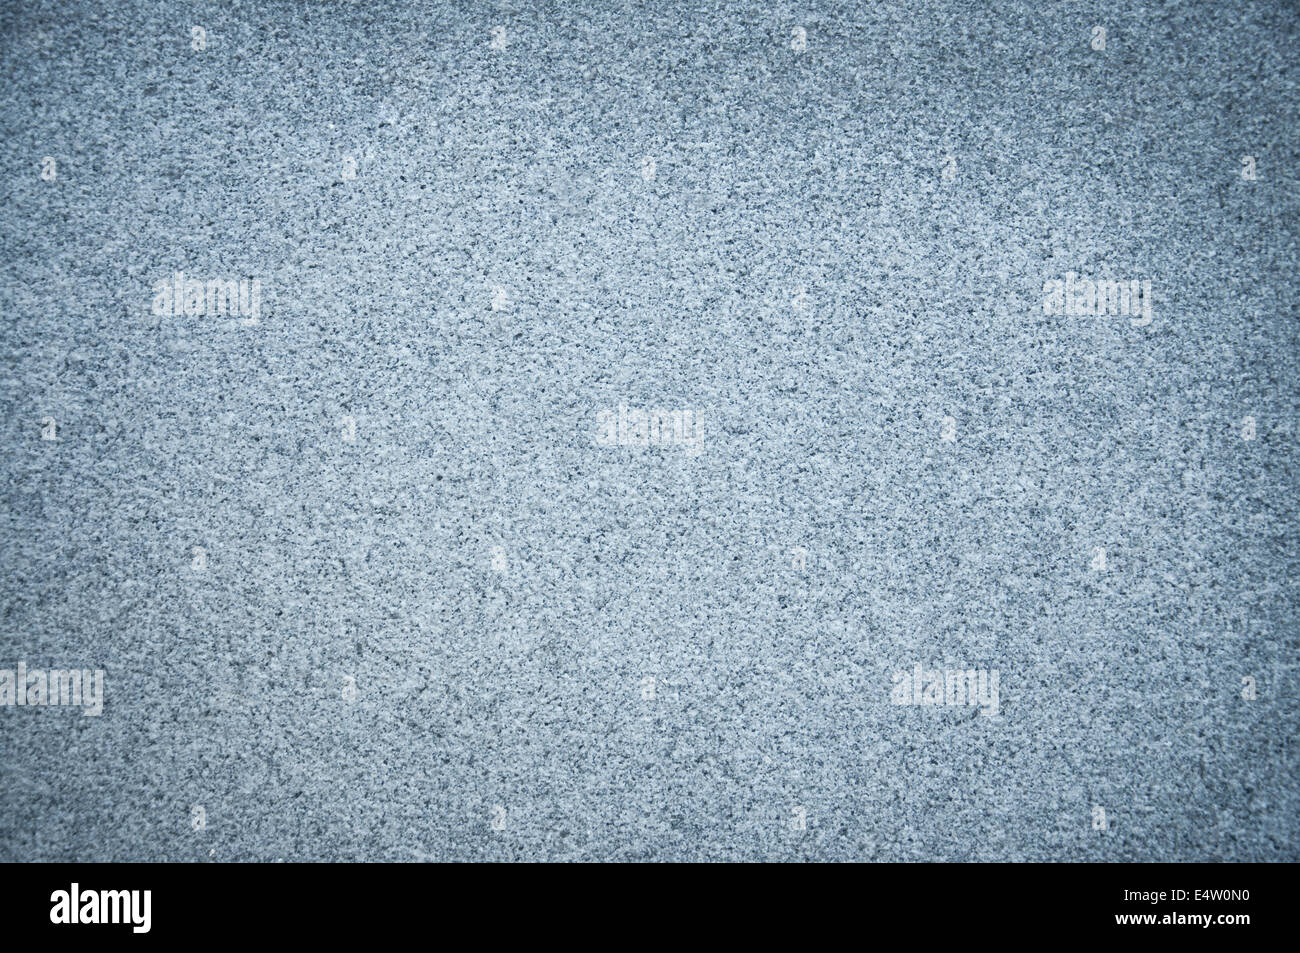 Abstract background for design. Stock Photo